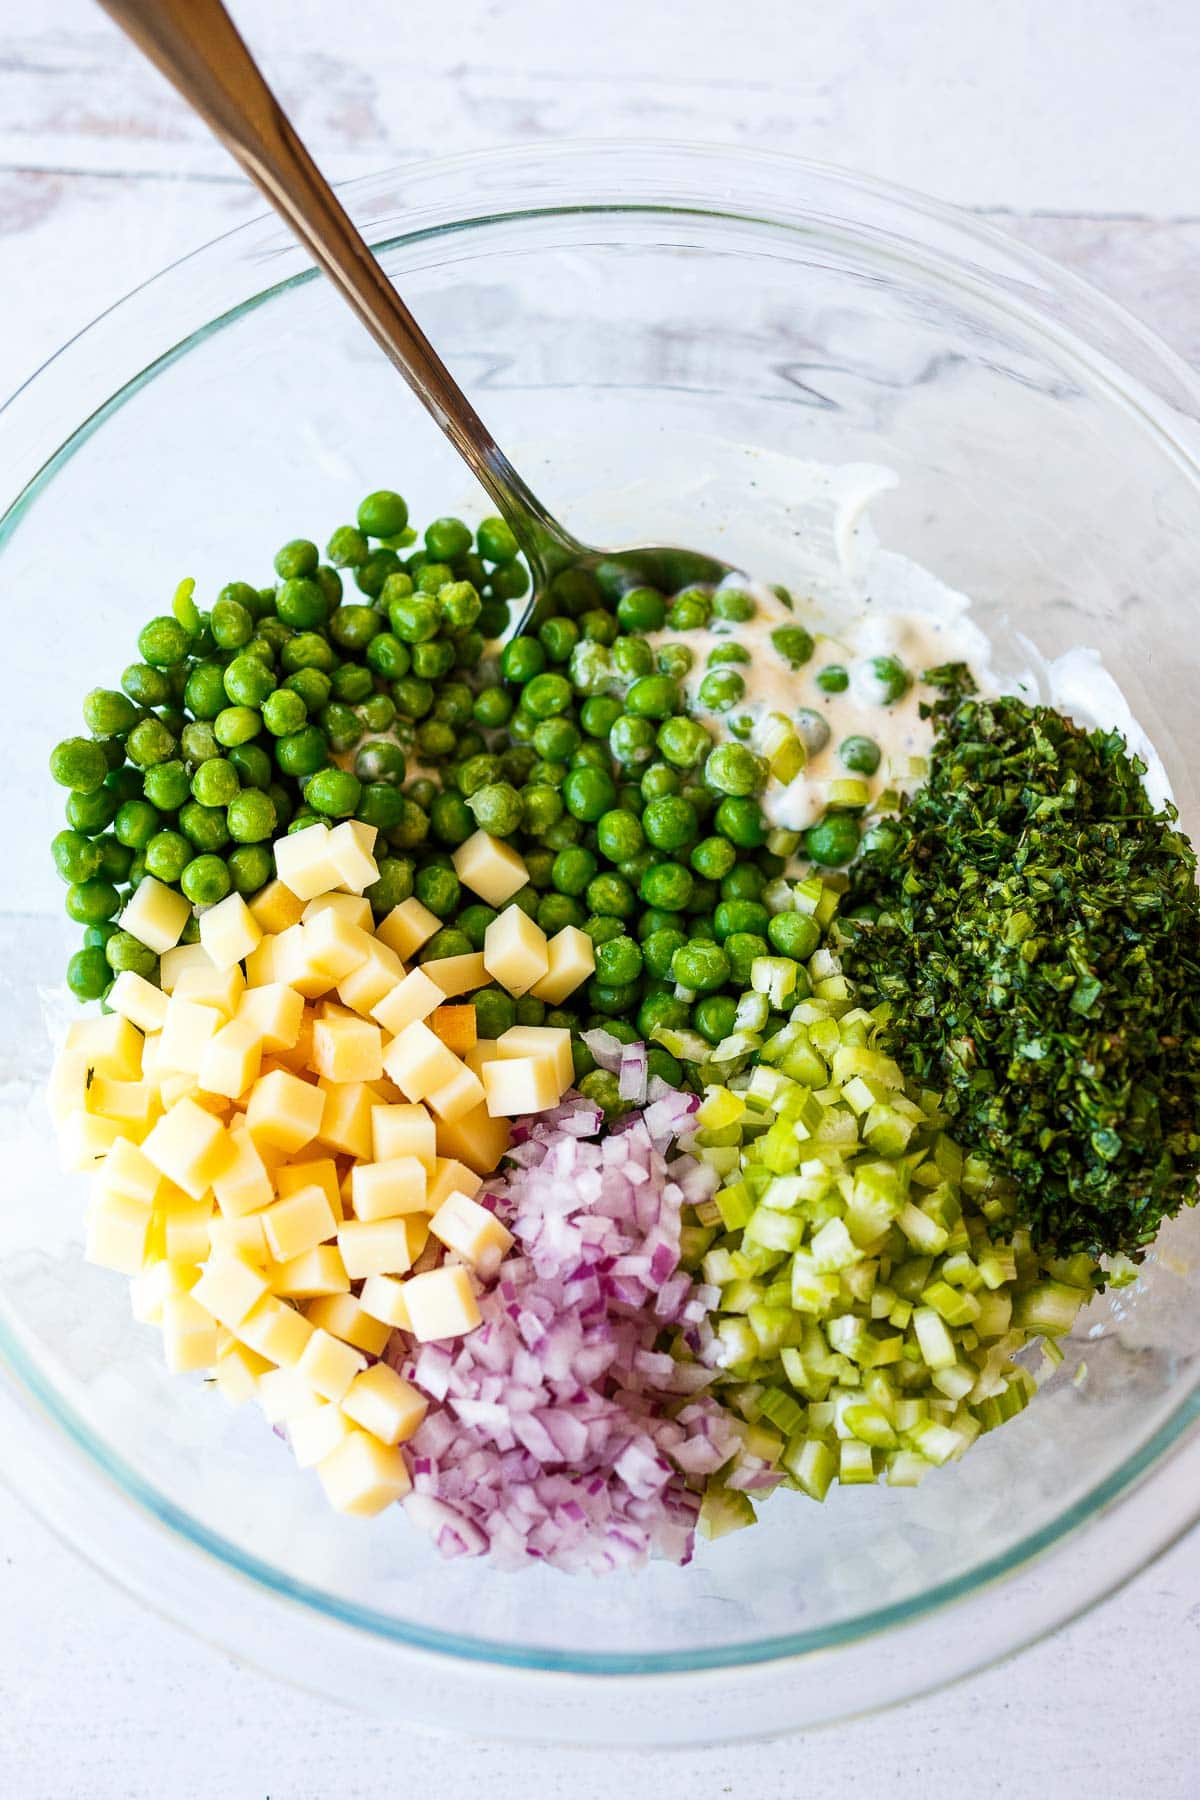 Mixing all ingredients in Pea Salad.